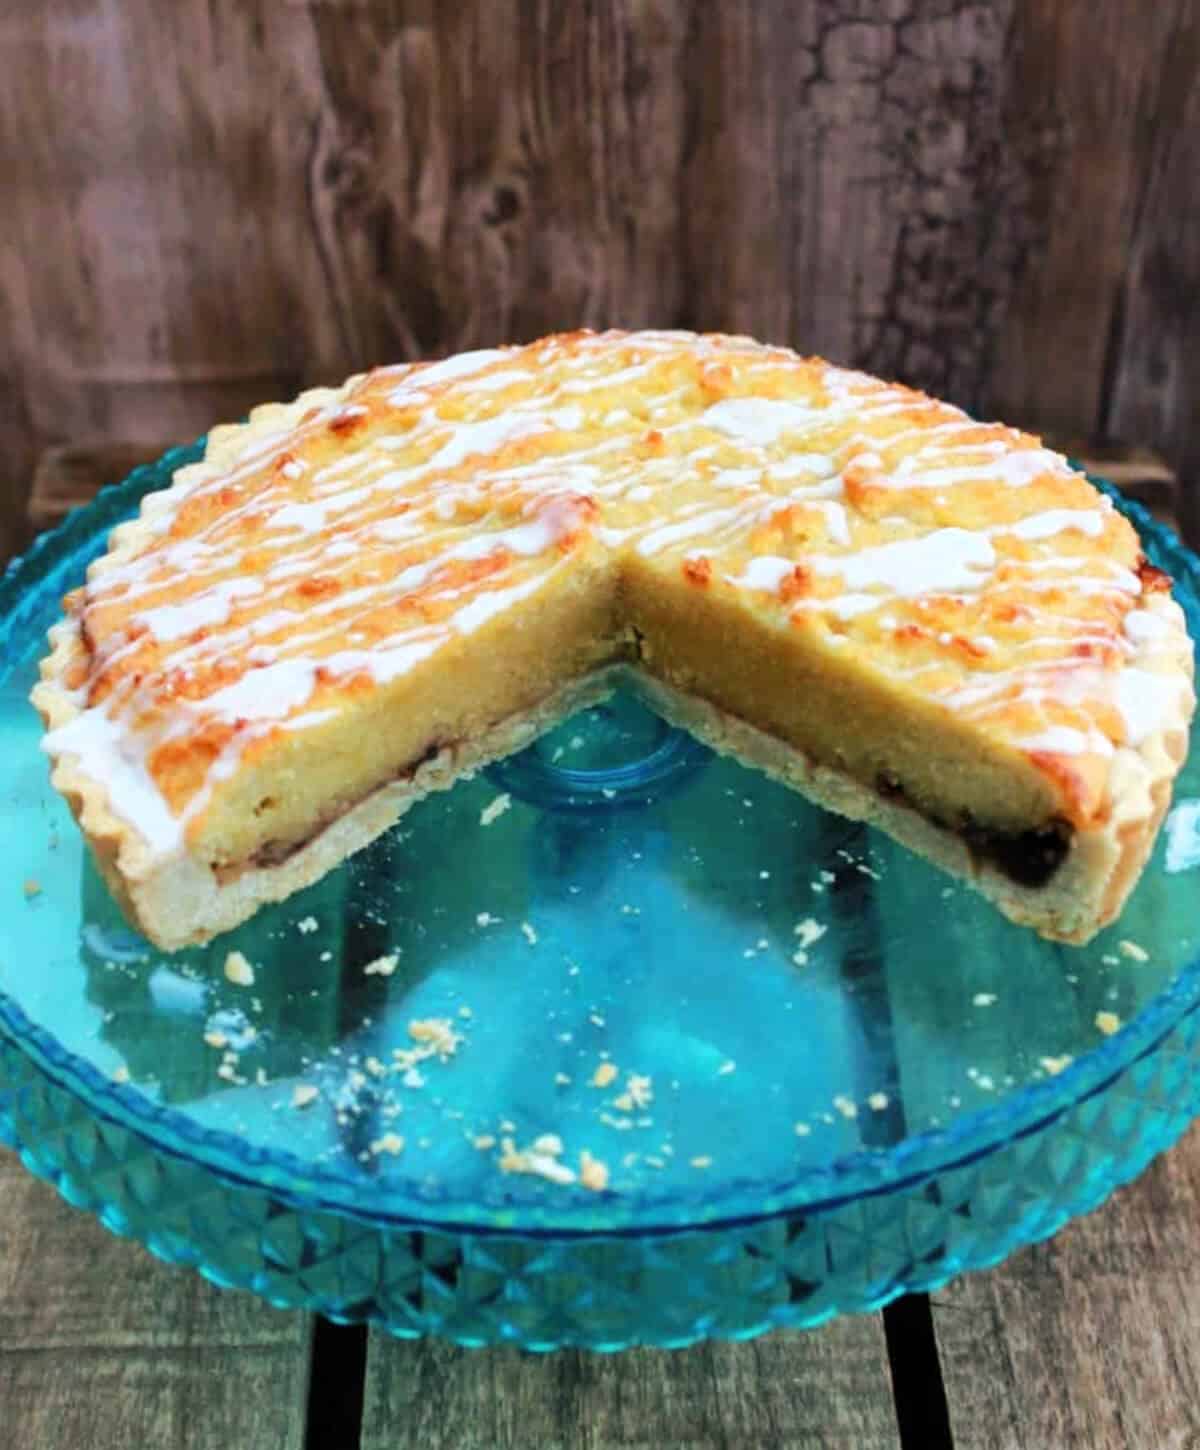 Tart on a cake stand with a large slice cut out, showing the layers inside.